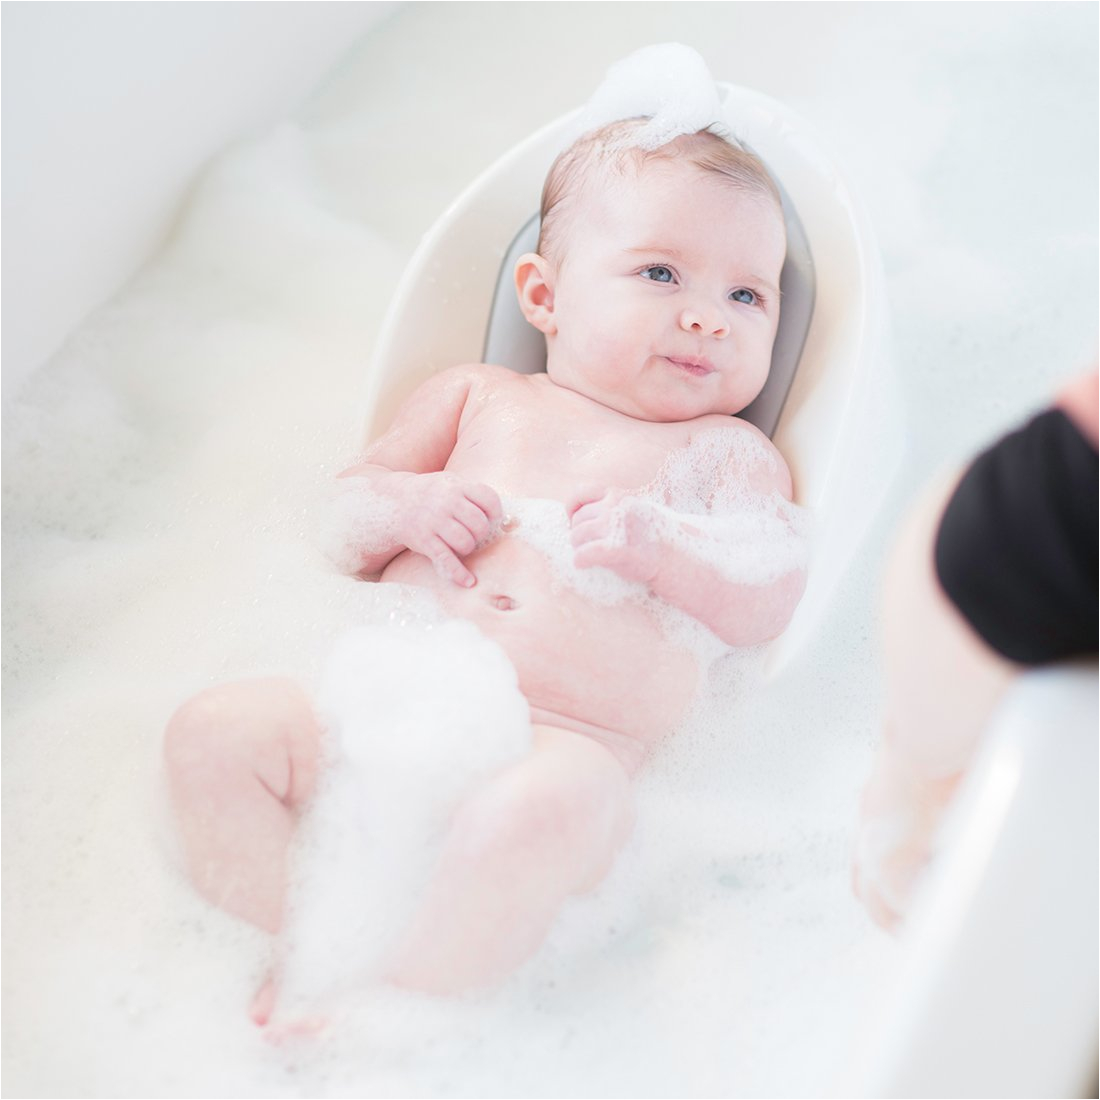 cheeky rascals baby bath support seat use from newborn up to 6 months white grey